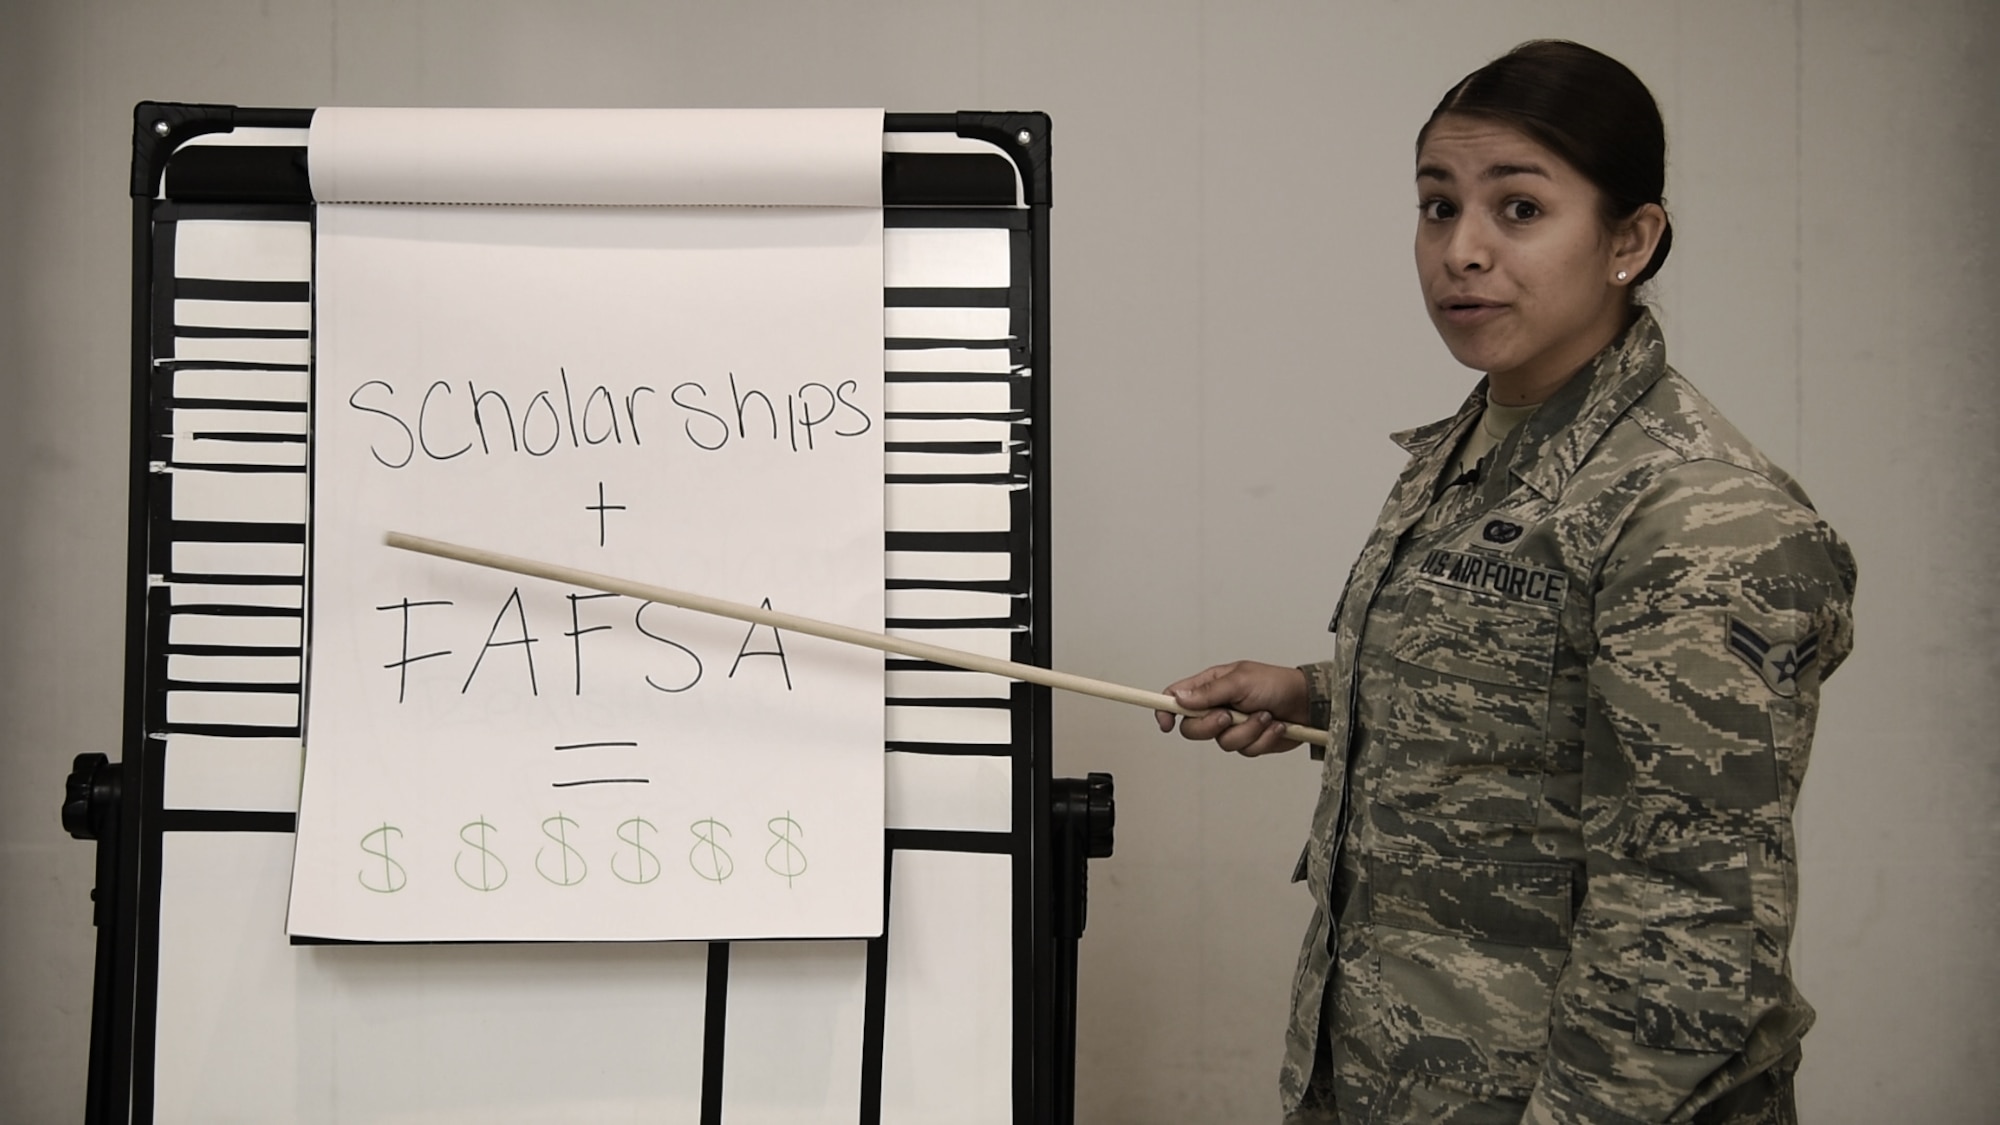 Did you know that Active Duty members are eligible for up to $4500 in Tuition Assistance each year? Or that children of Active Duty members in Arizona are eligible for a scholarship to help cover the cost of private school?

Learn more about some of the education benefits in this video and then head to the education center or Luke A&FRC to get started!